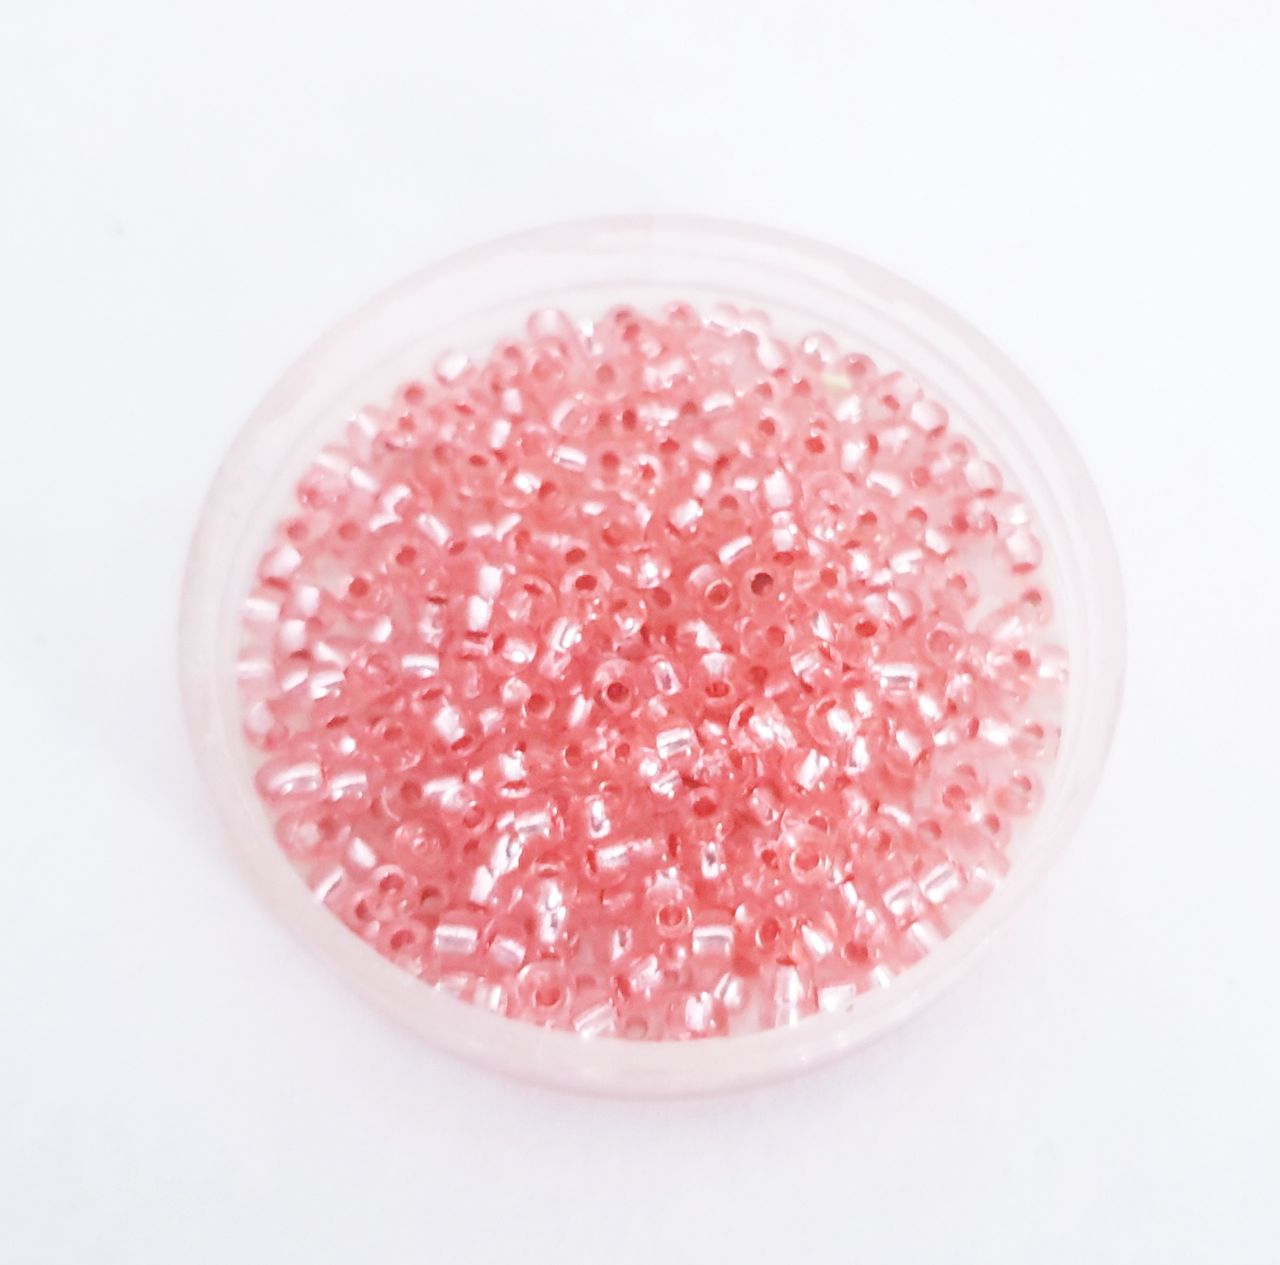 8 0 Czech Seed Bead Pink - Blossom Silverlined